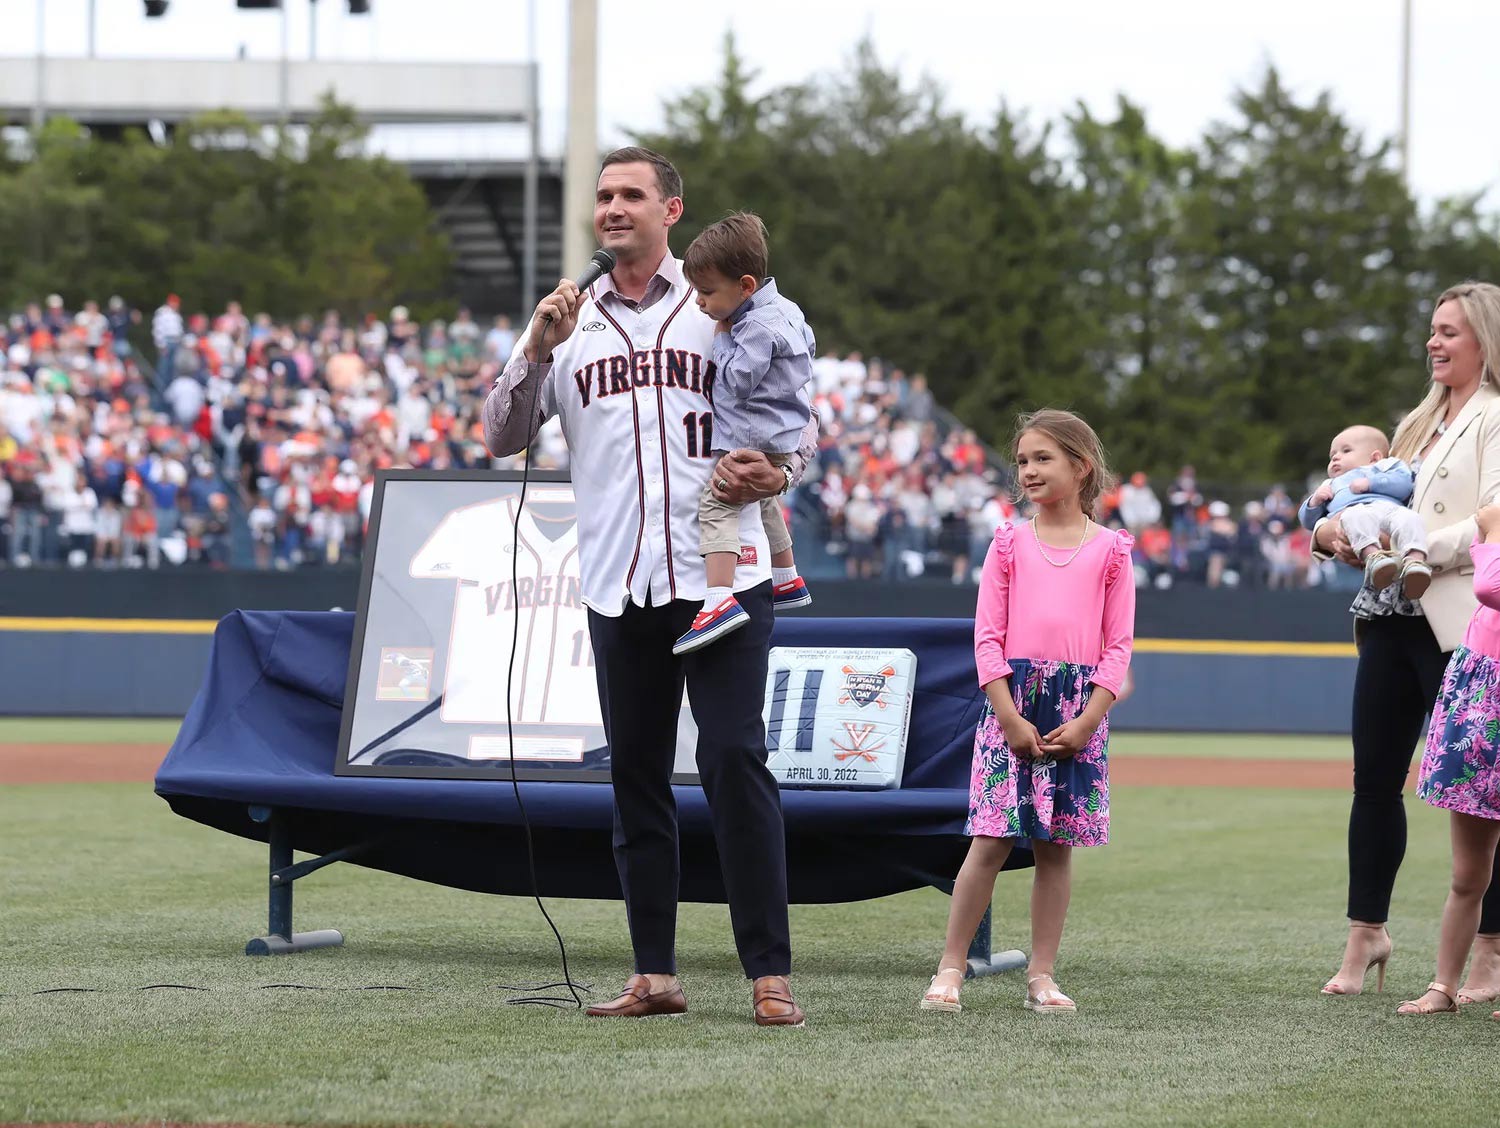 Ryan Zimmerman in a Virginia jersey stands in a baseball field holding his small son and speaking into a microphone